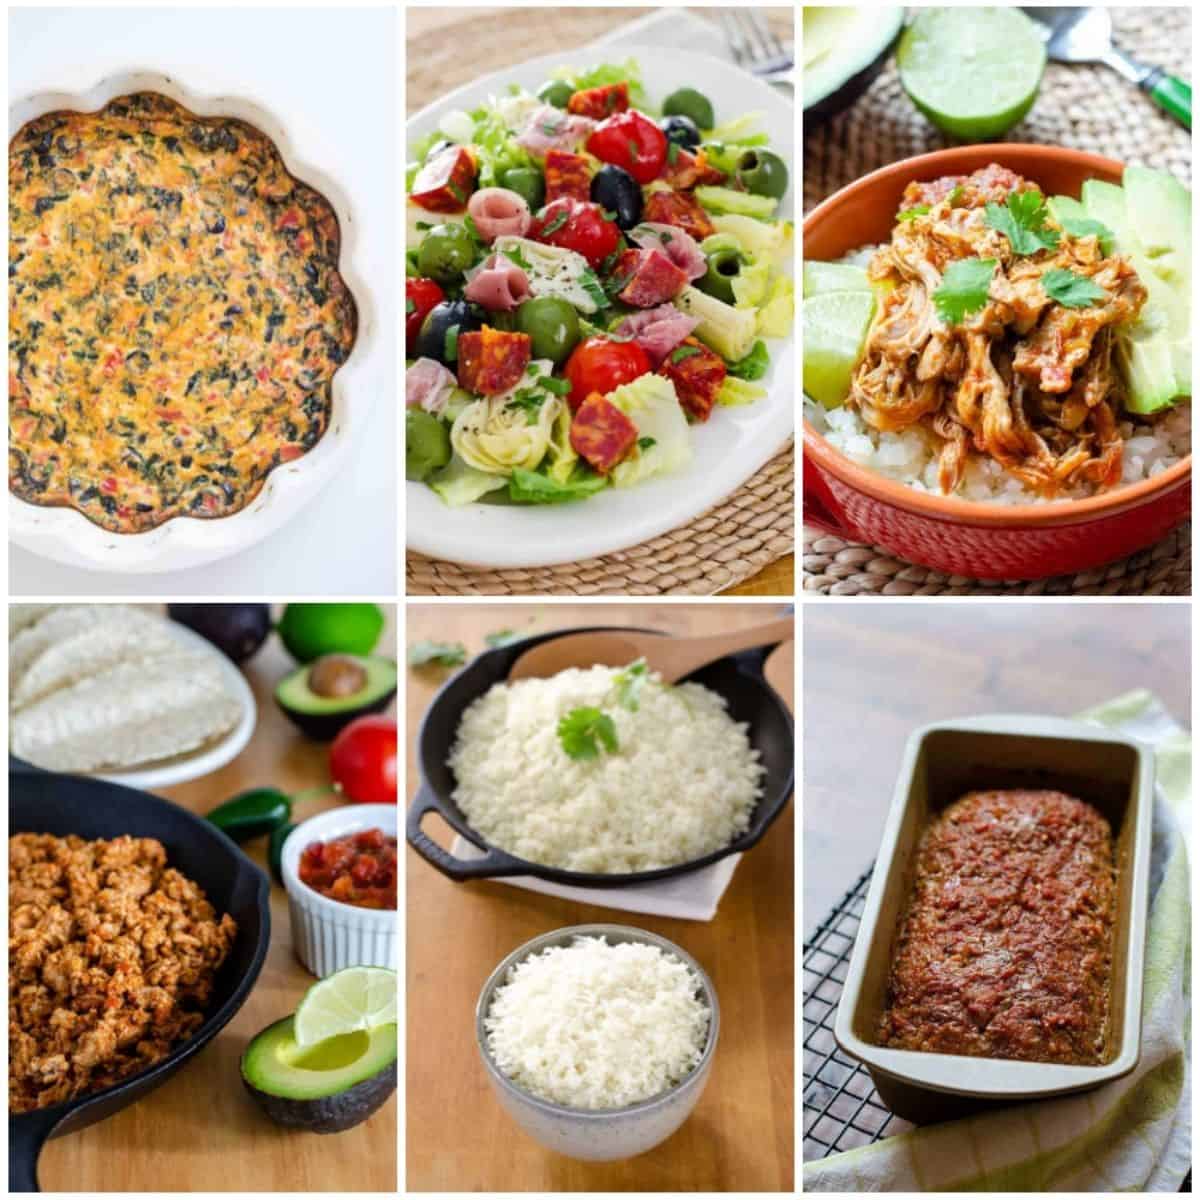 21 Easy Keto Meal Prep Recipes You Can Make This Week - Cook Eat Well